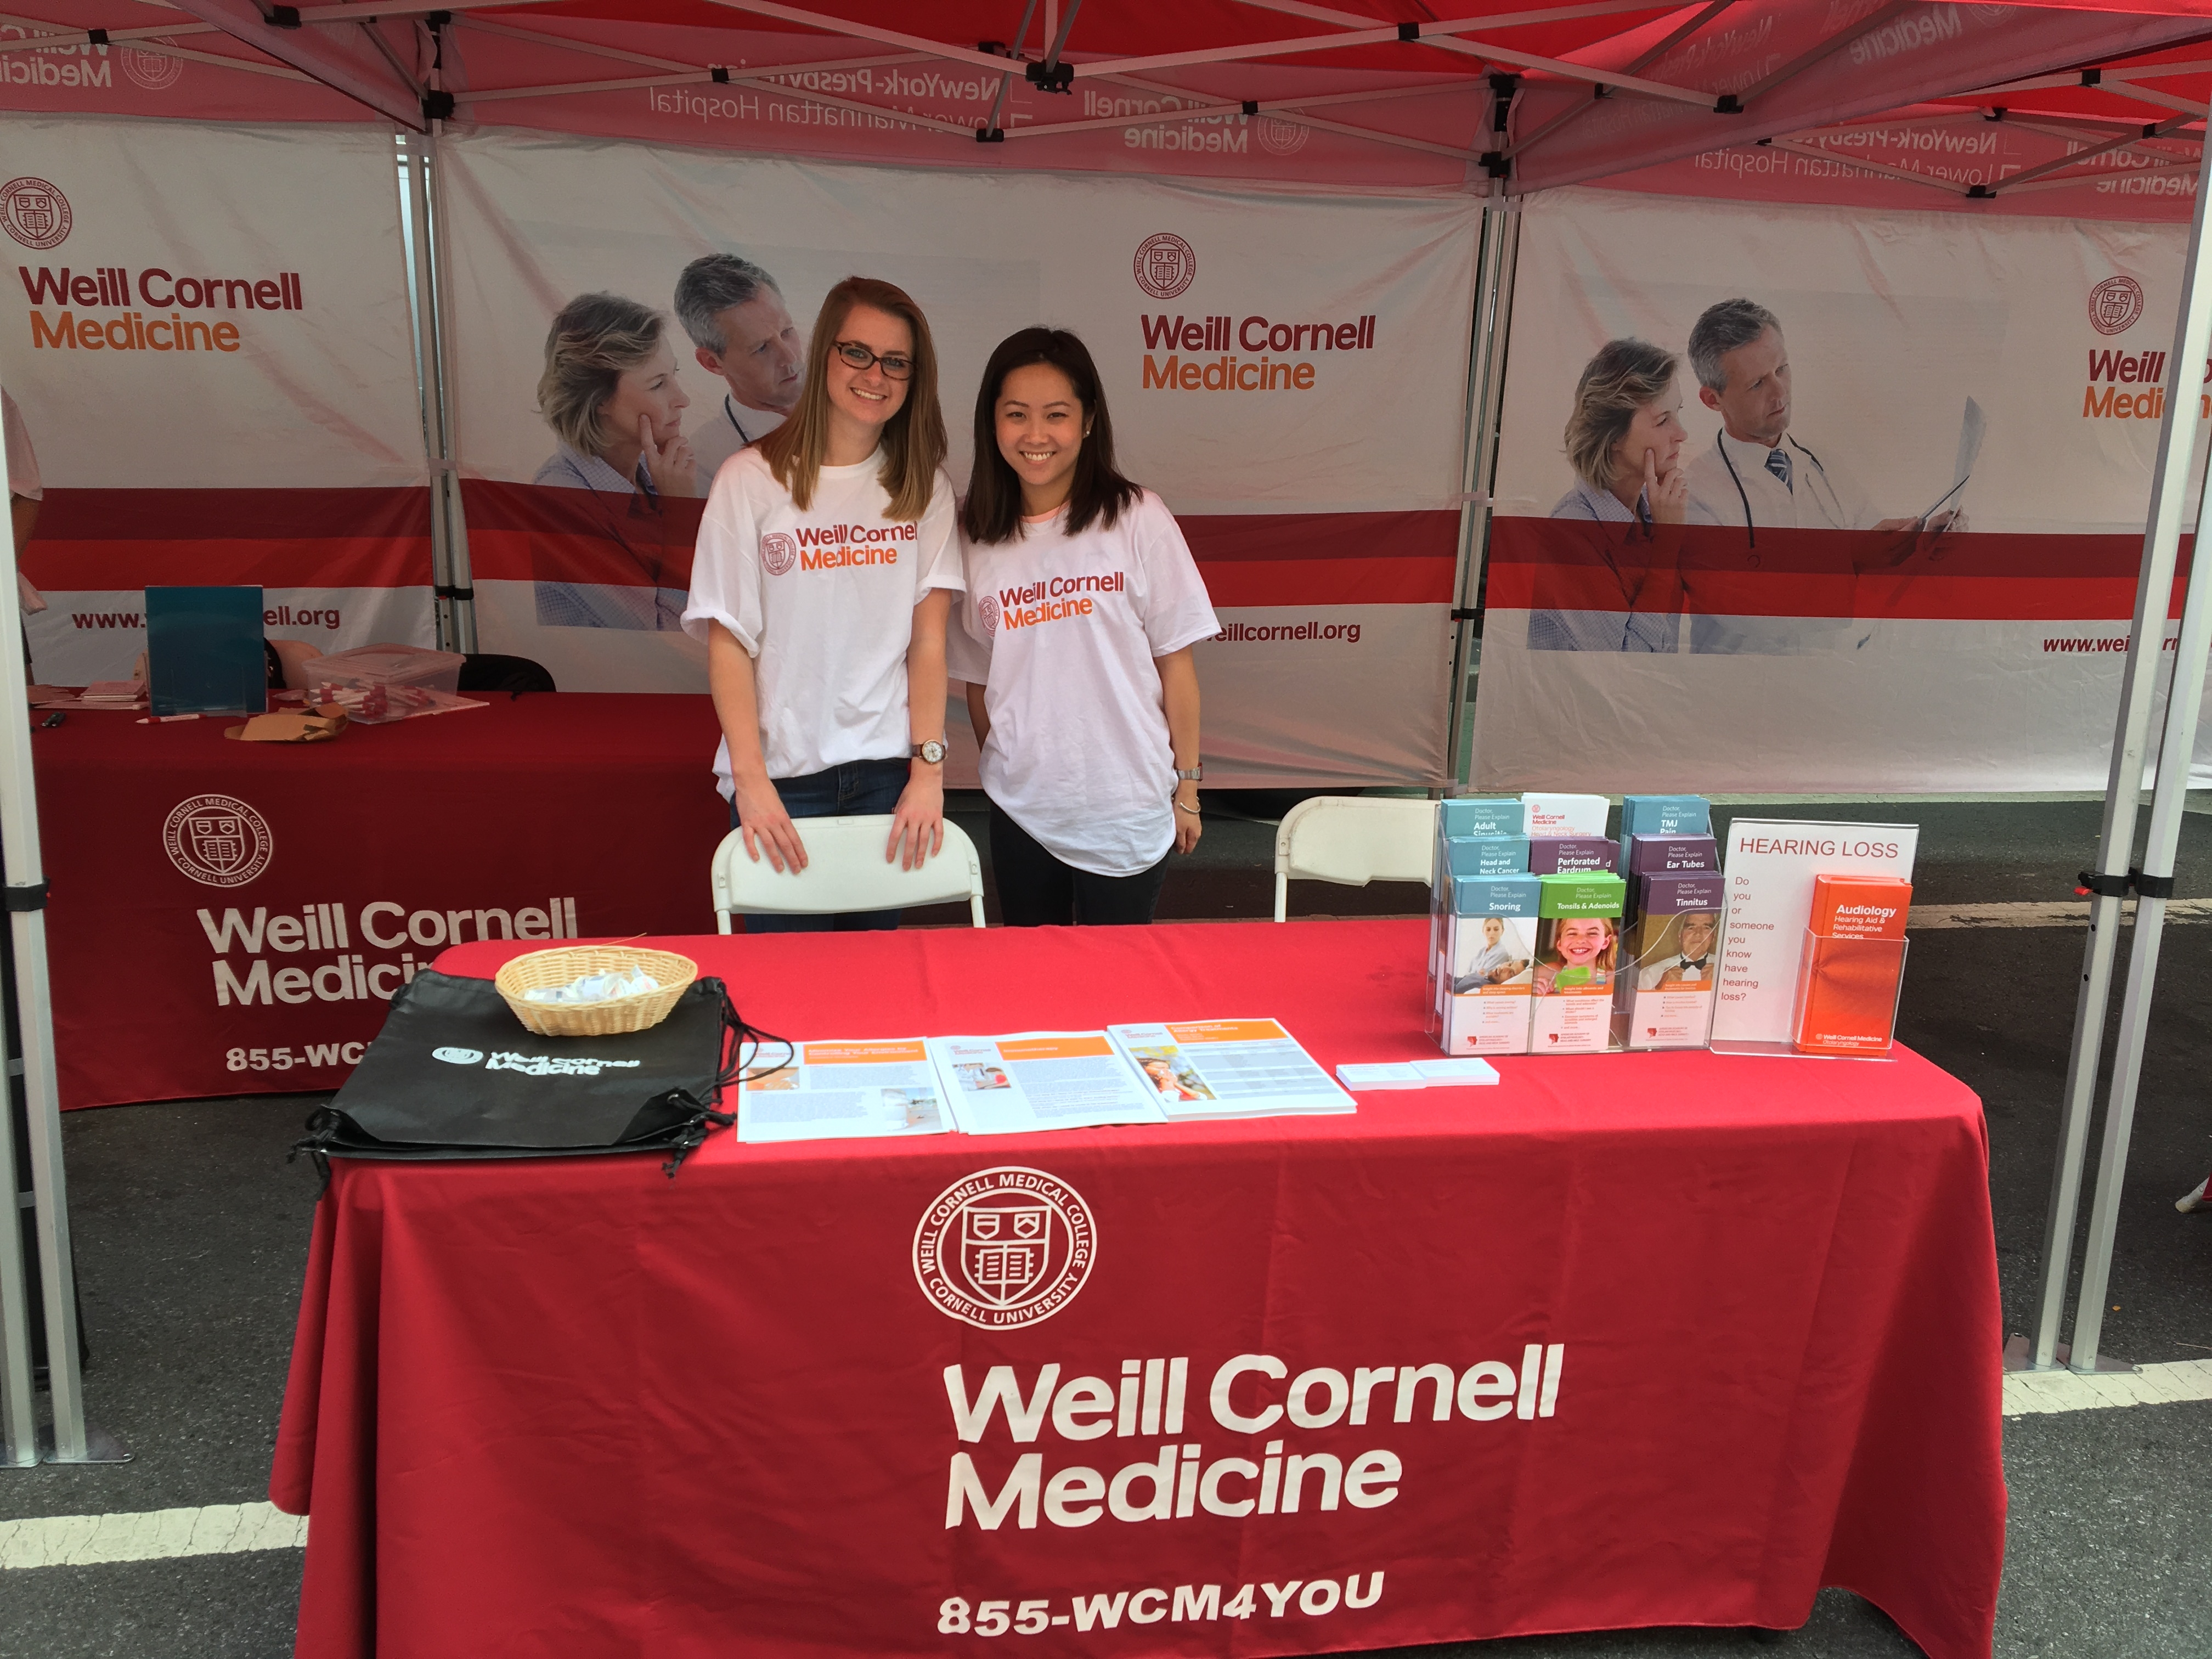 Various staff members from Weill Cornell Medicine's 2315 Broadway location were at the festival providing informational brochures about our clinical services.